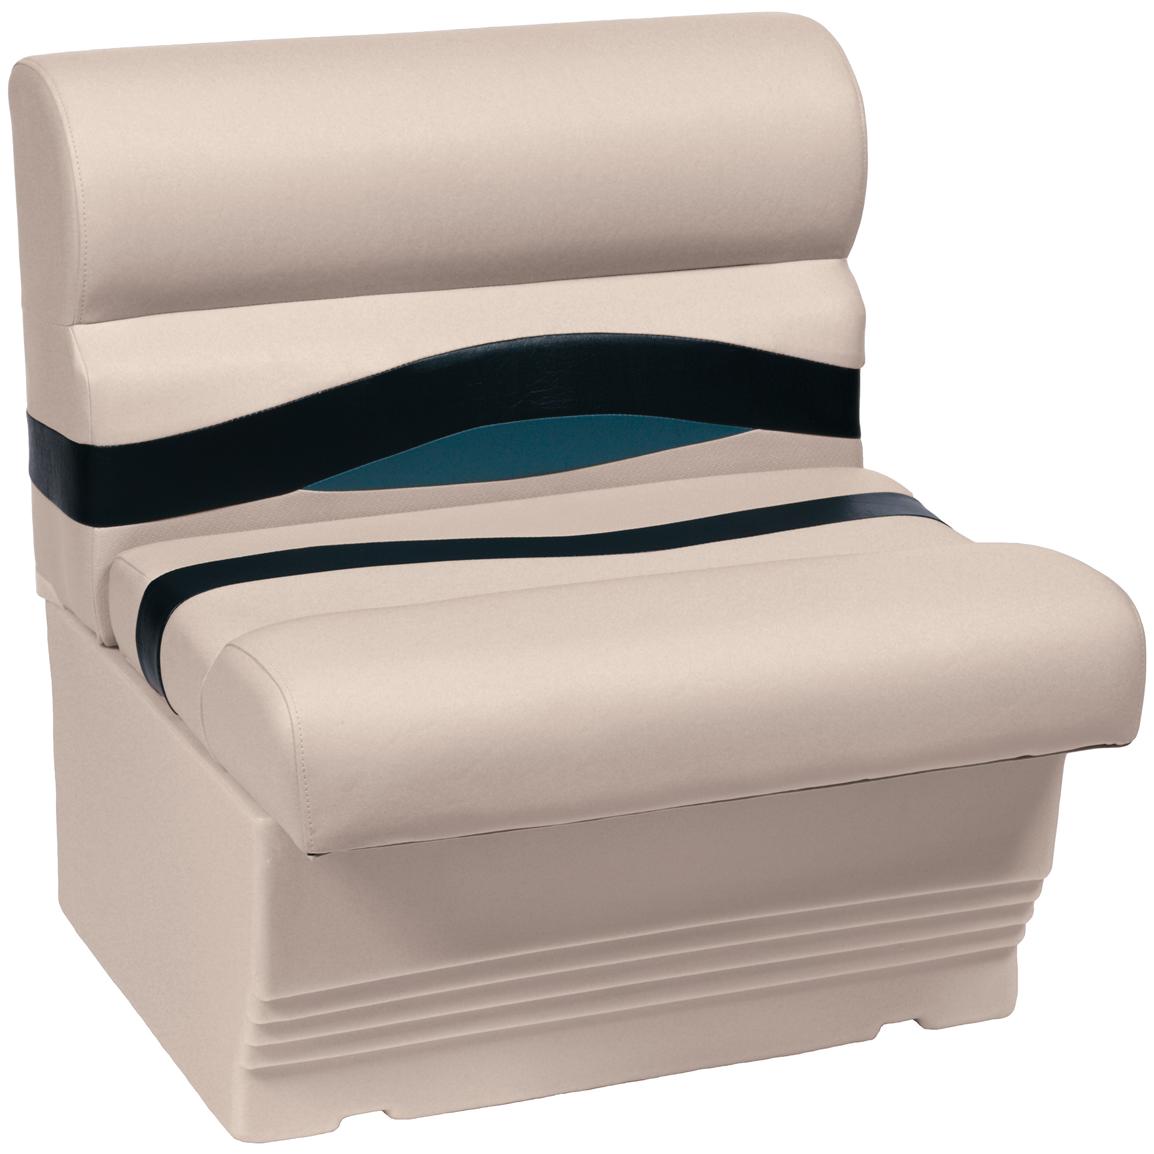 Wise® Premier 1100 Series 27 inch Pontoon Bench Seat, Color A